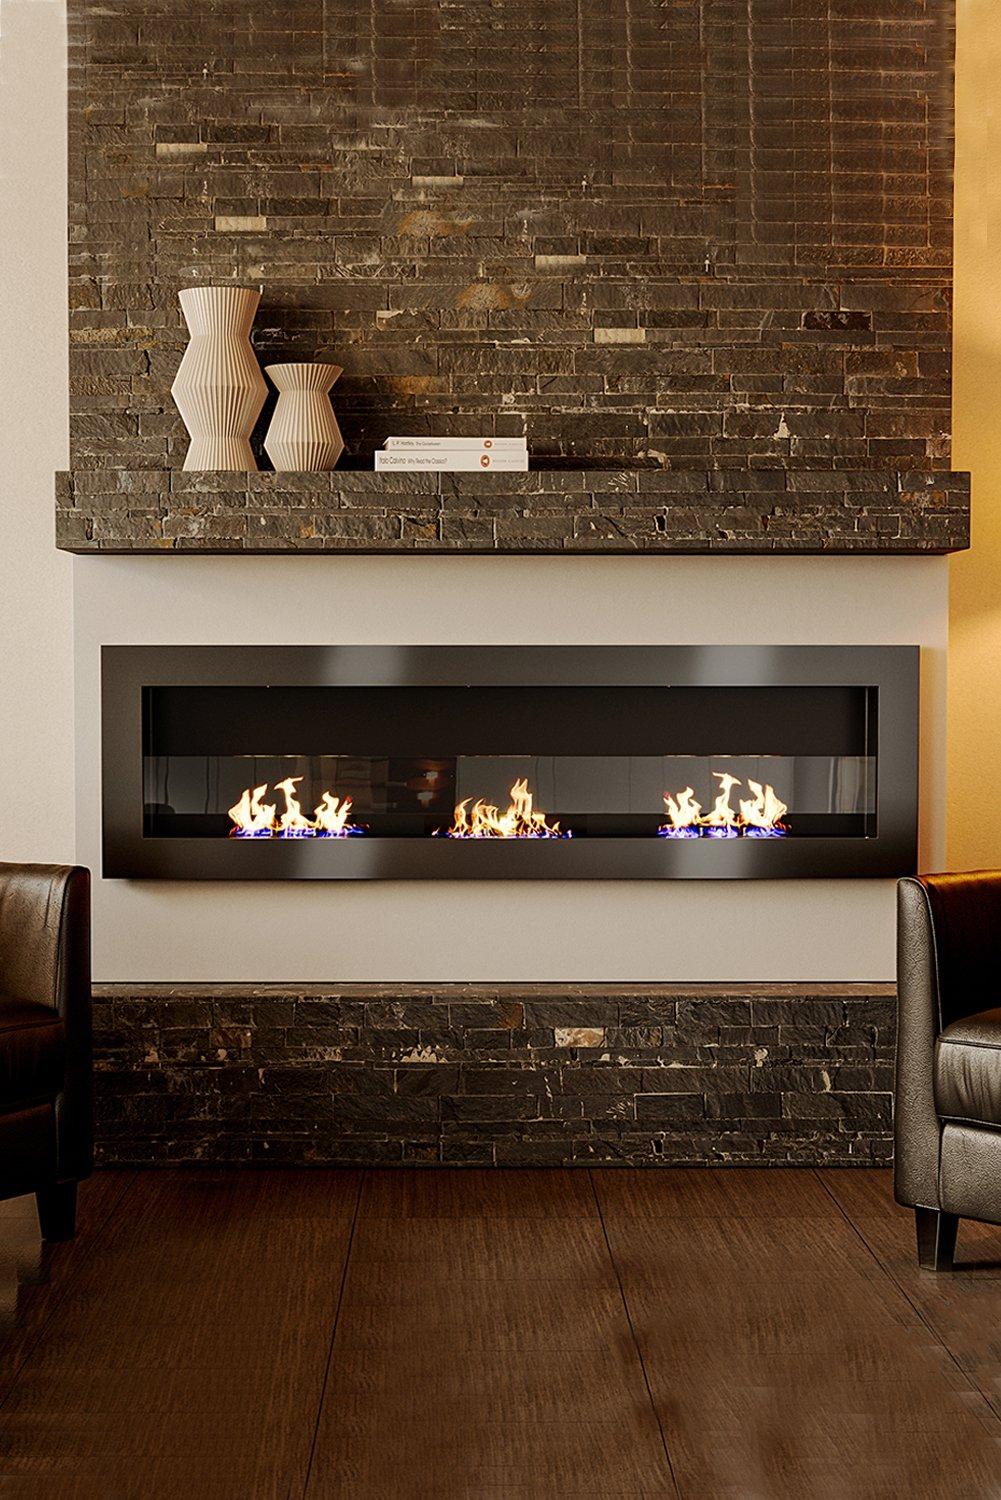 55 Inch Recessed and Wall Mount Bio Ethanol Fireplace, Adjustable Flame